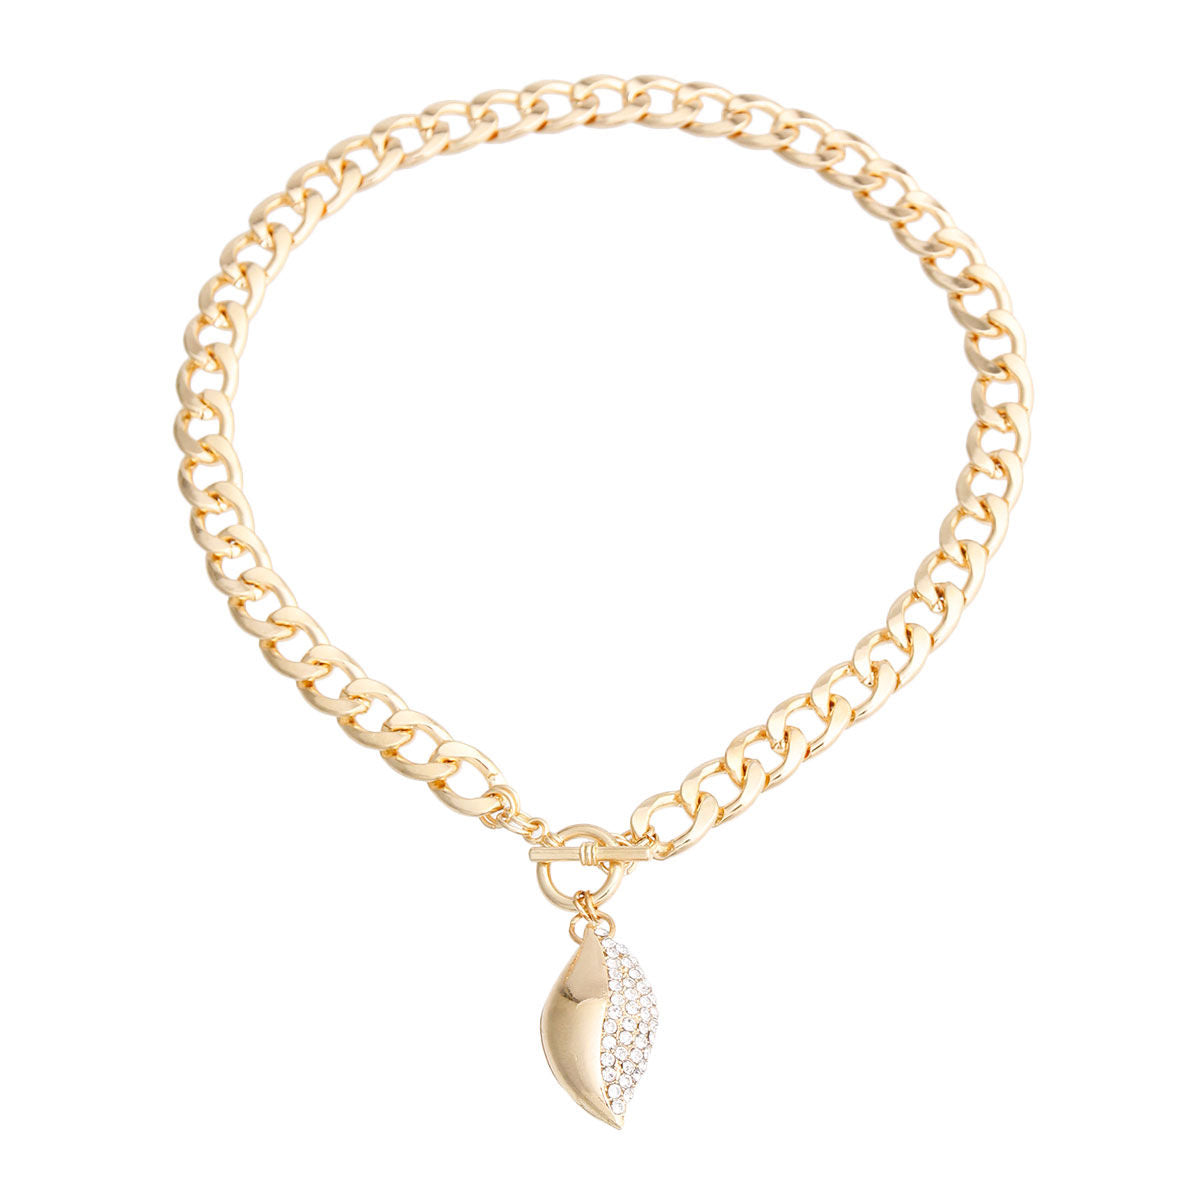 Gold Curved Oval Pave Charm Necklace